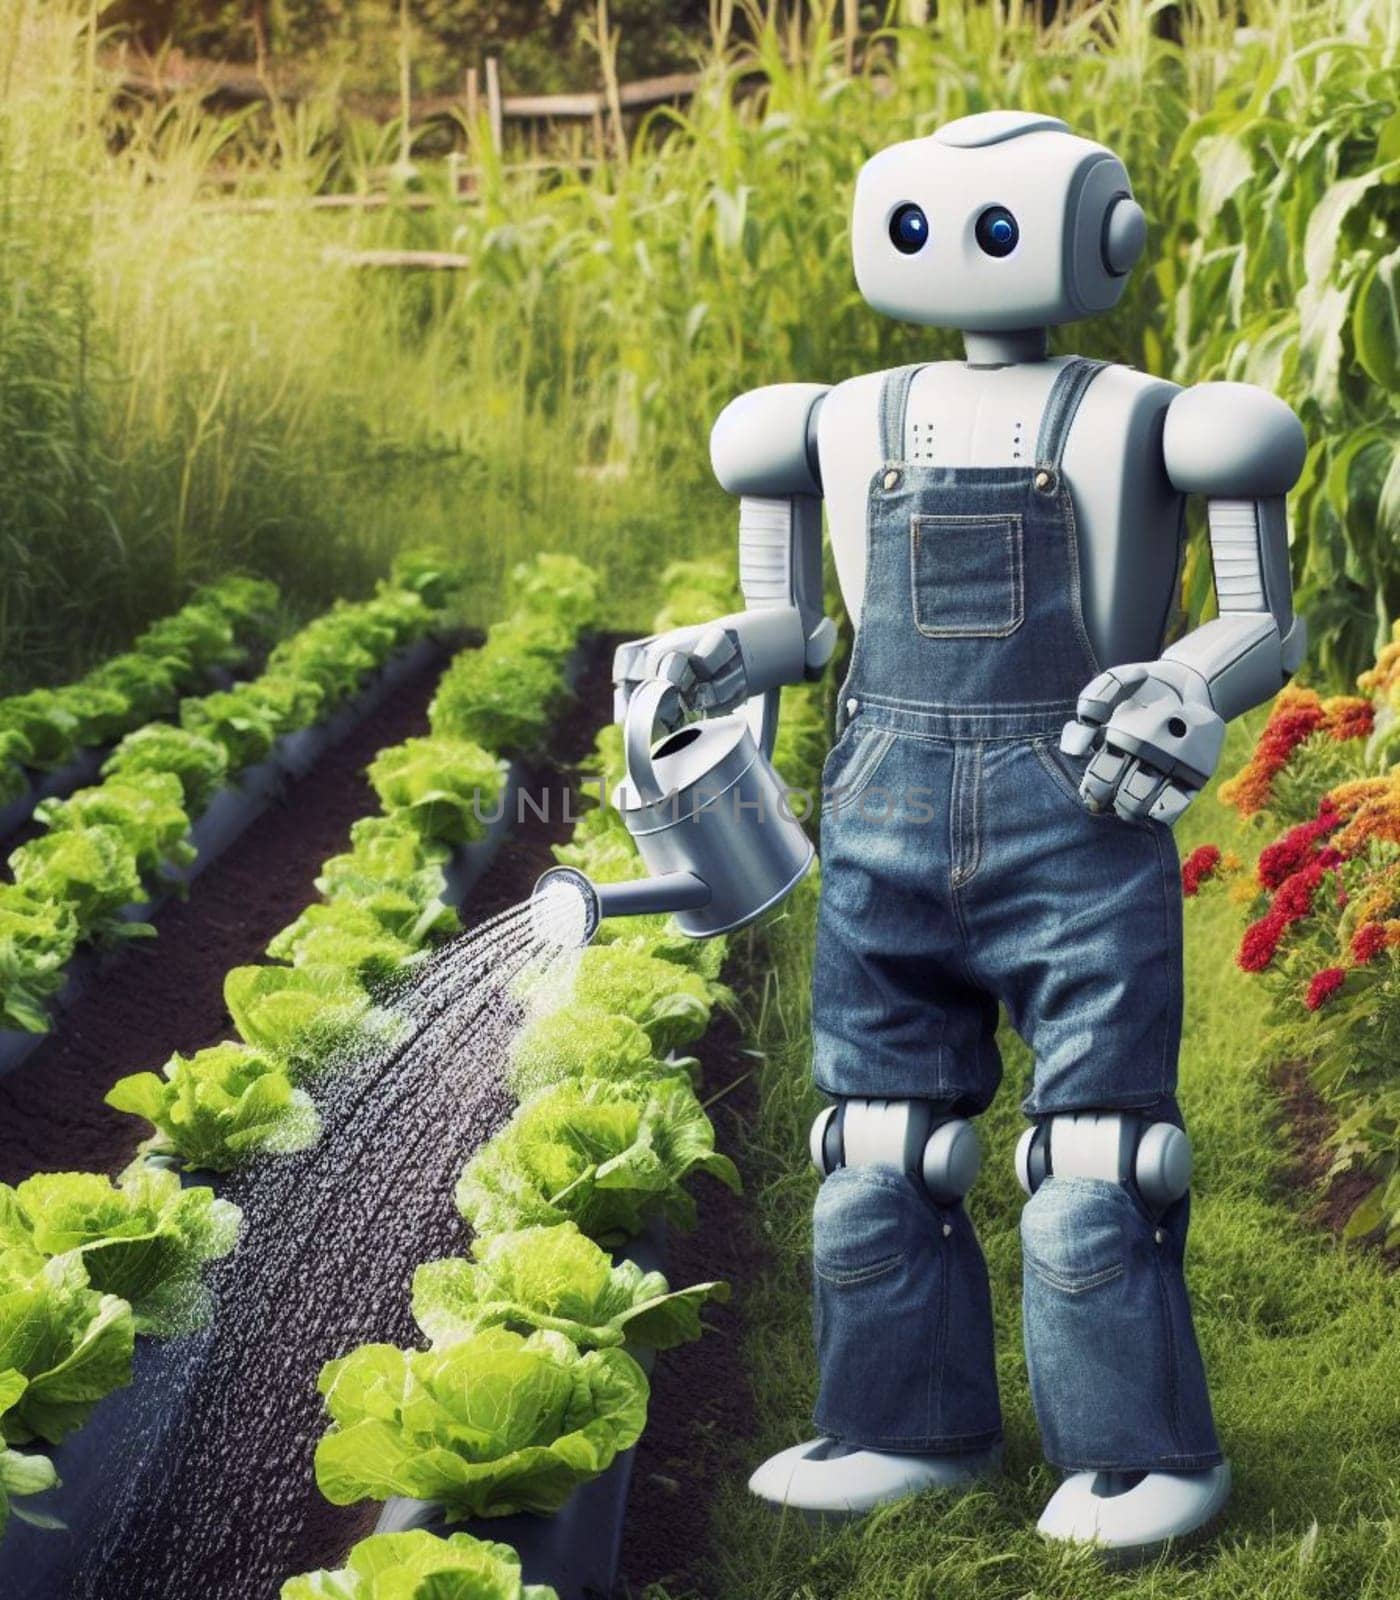 robot watering working in the farm vegetable garden to grow produce for human consumption by verbano